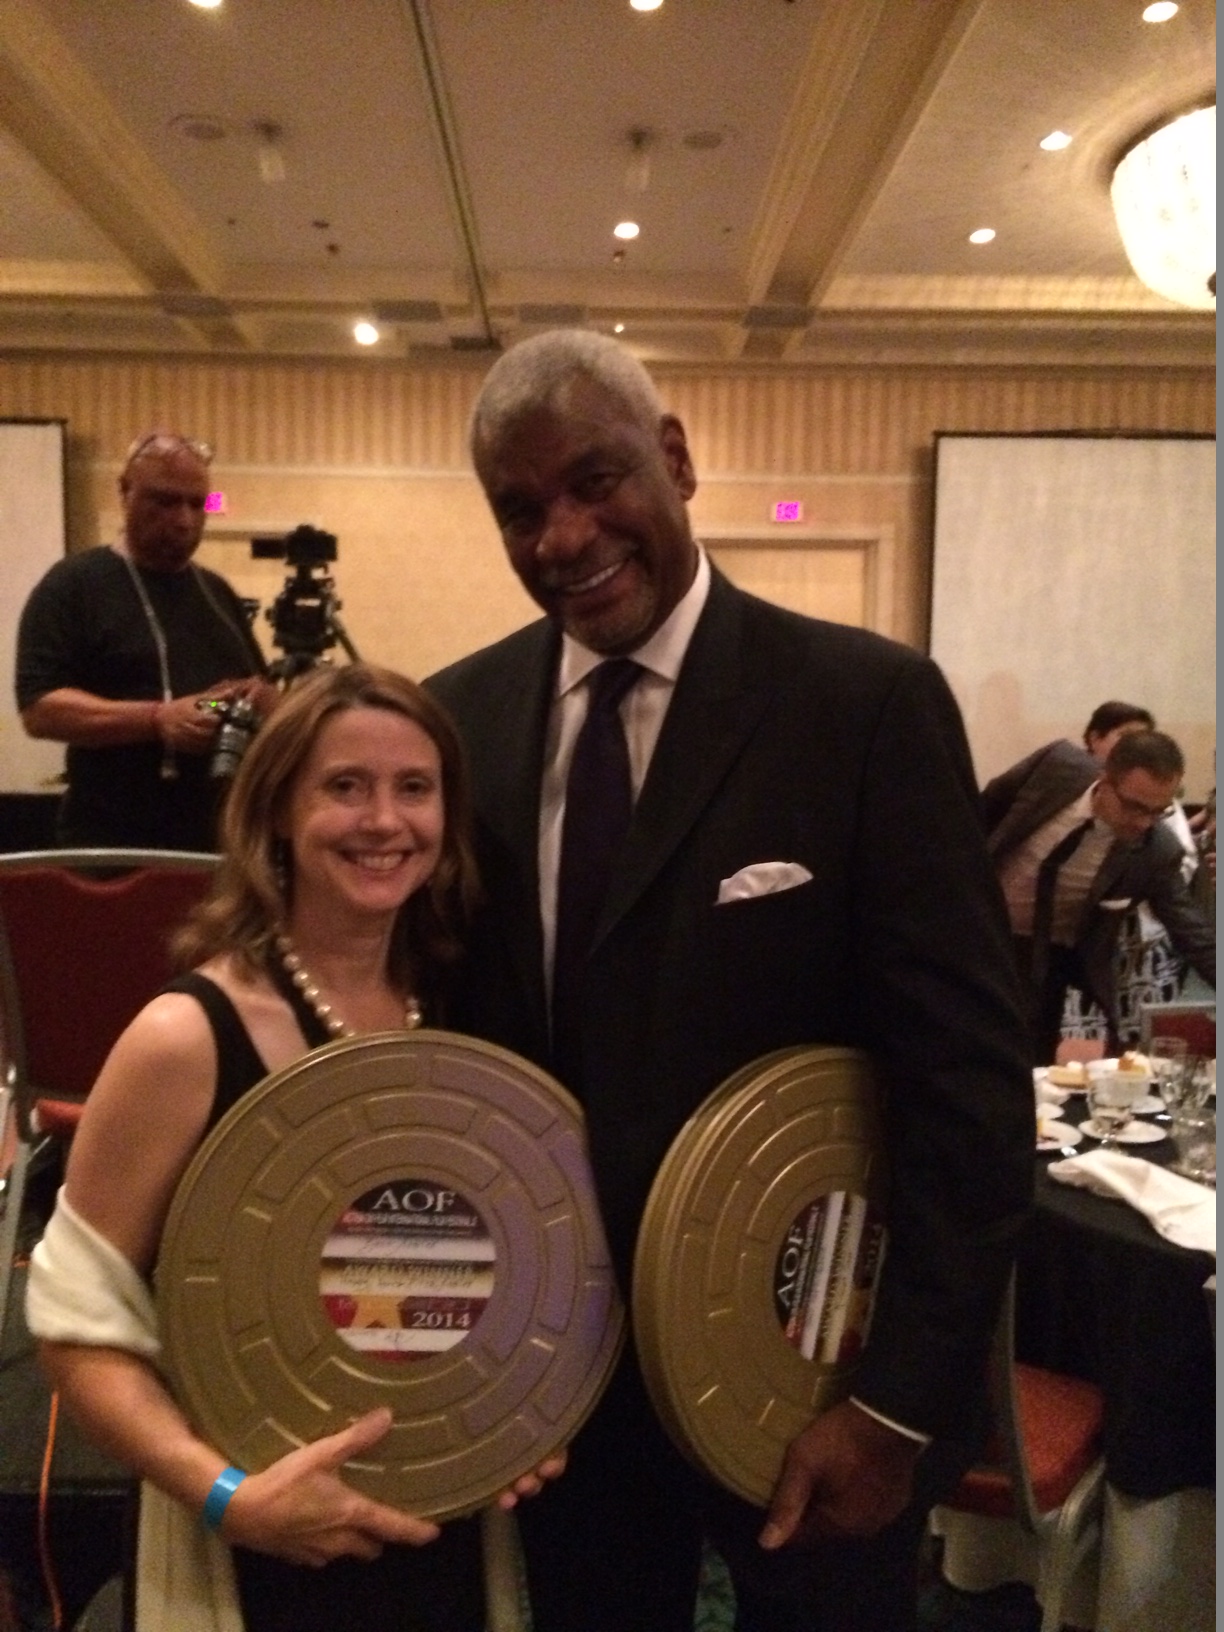 Colleen with Richard Gant at the AOF. Colleen won for 